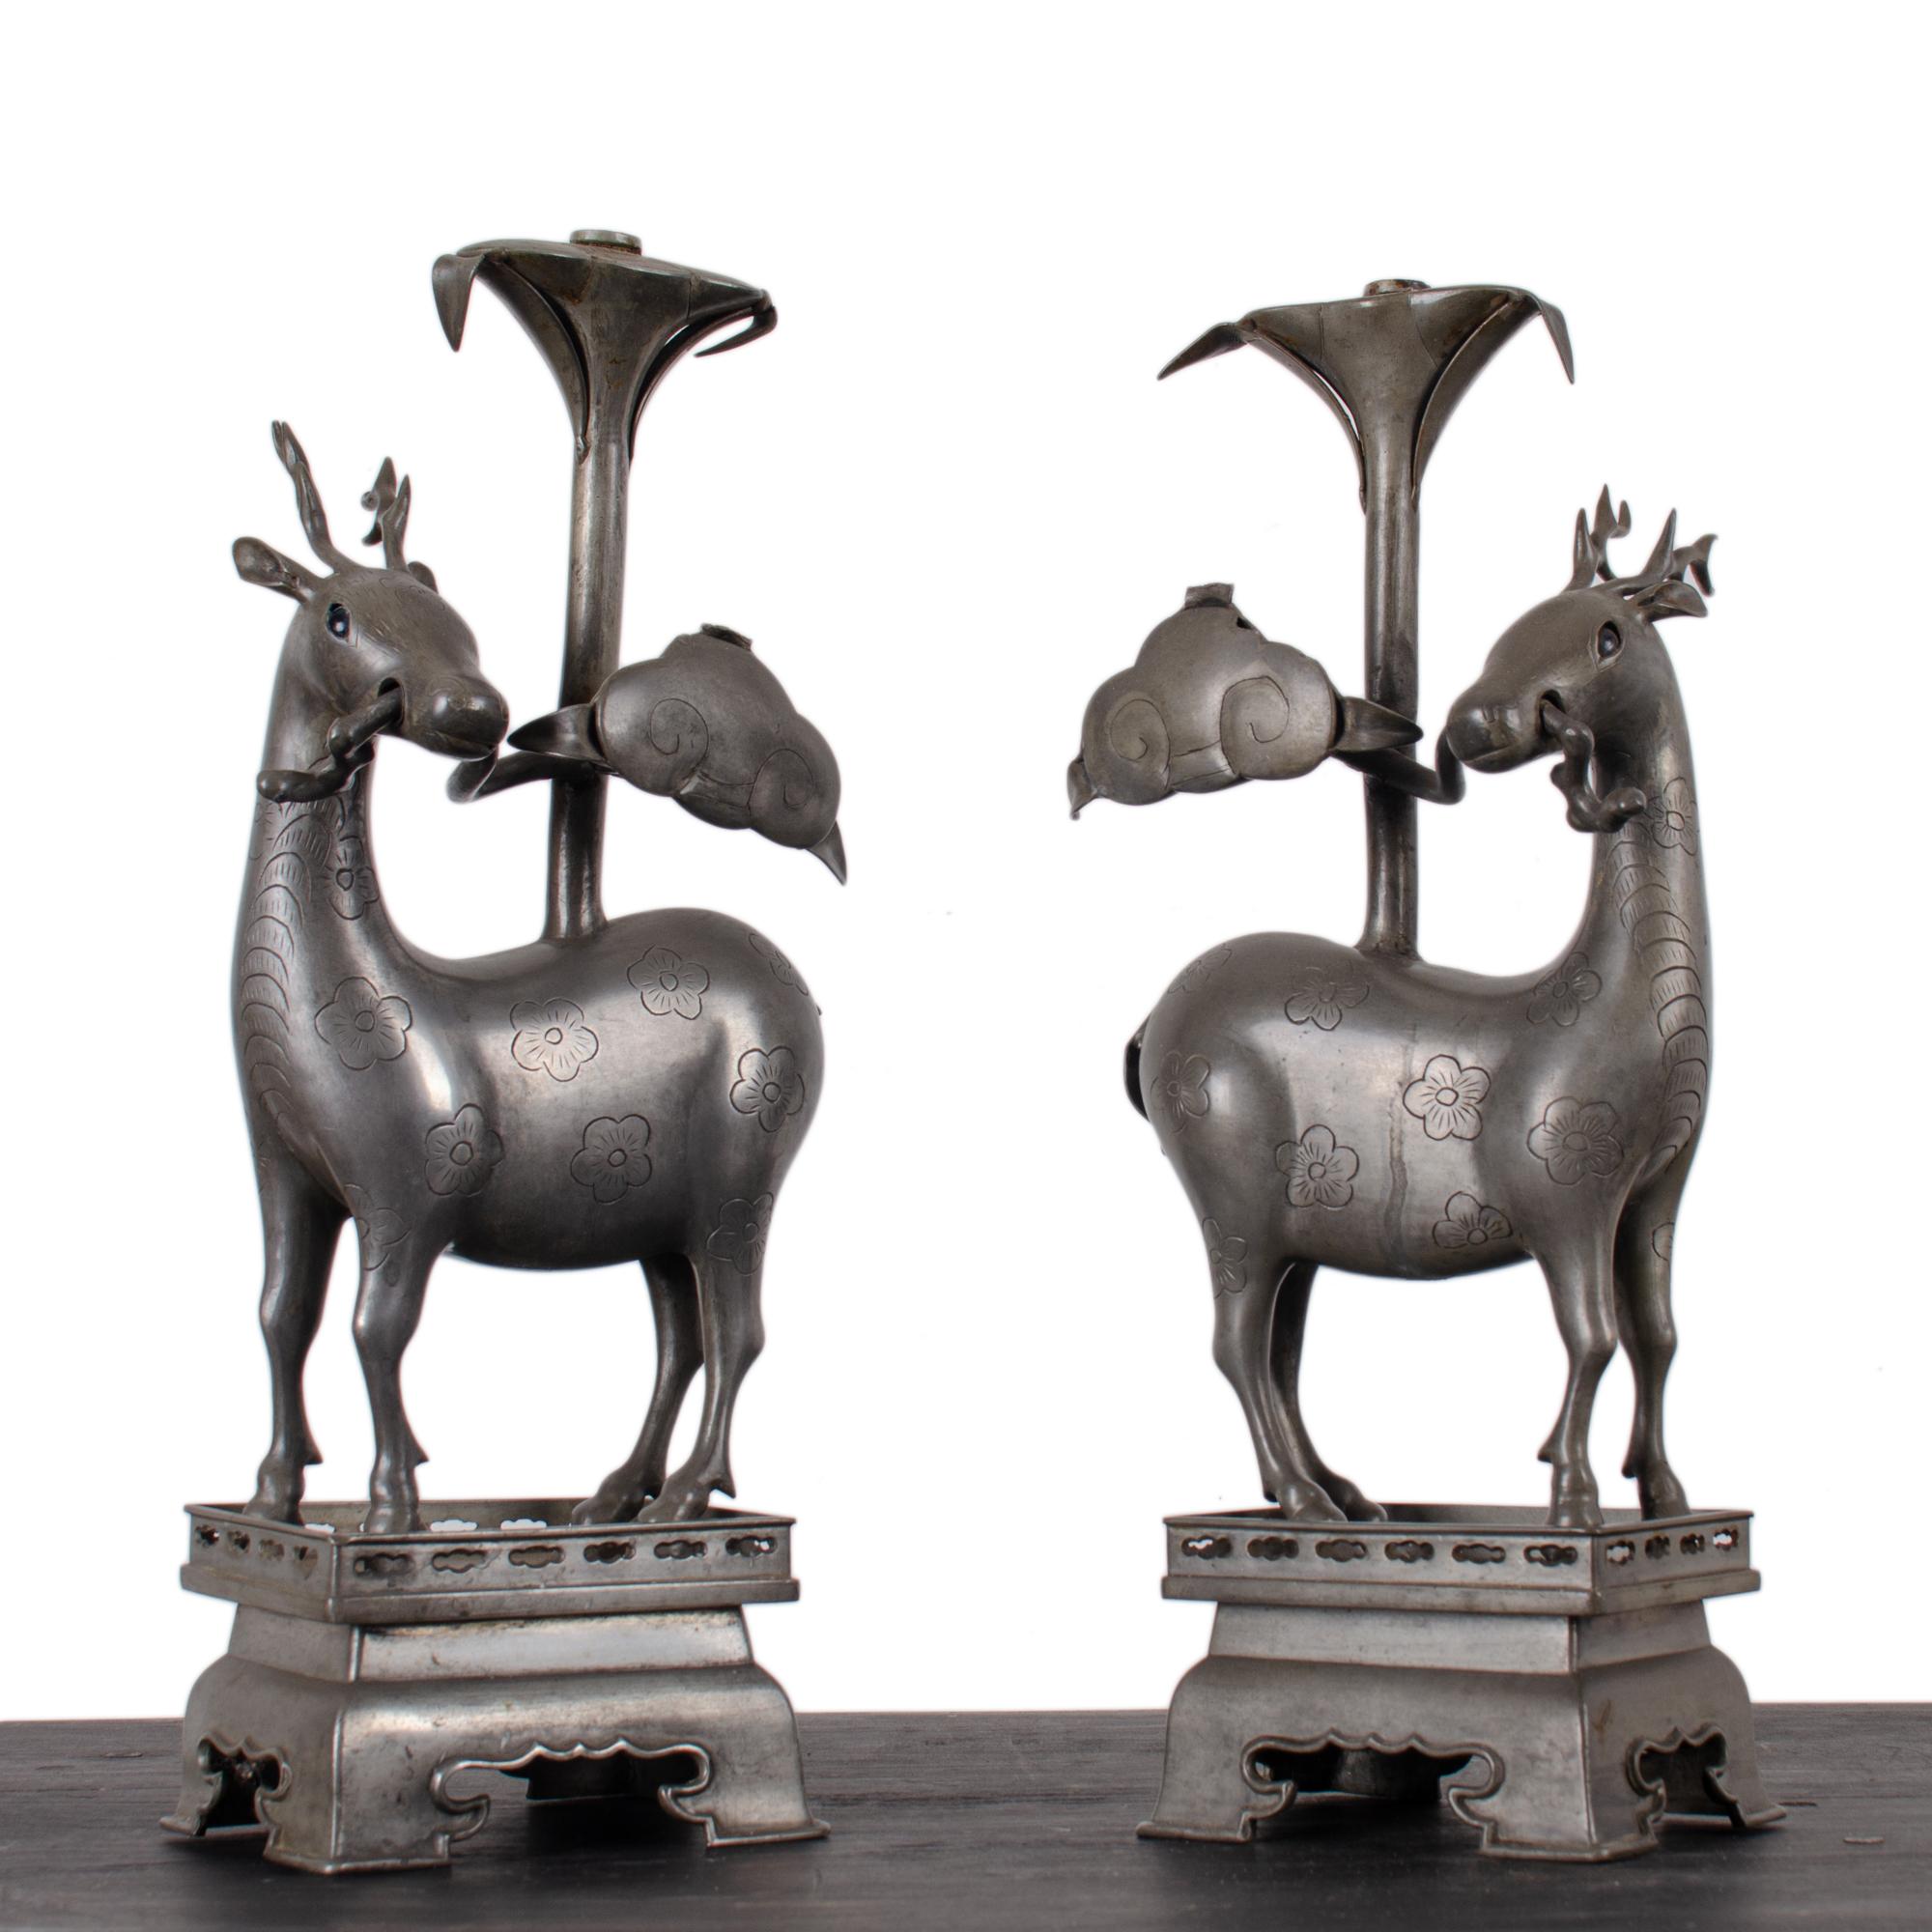 A pair of Chinese figural pewter candlesticks in the form of deer, Qing Dynasty, circa 1880.  

Raised on rectangular plinth; the deer with inset cobalt glass eyes and decorated with incised flowers and holding lingzhi (reishi) mushrooms in their